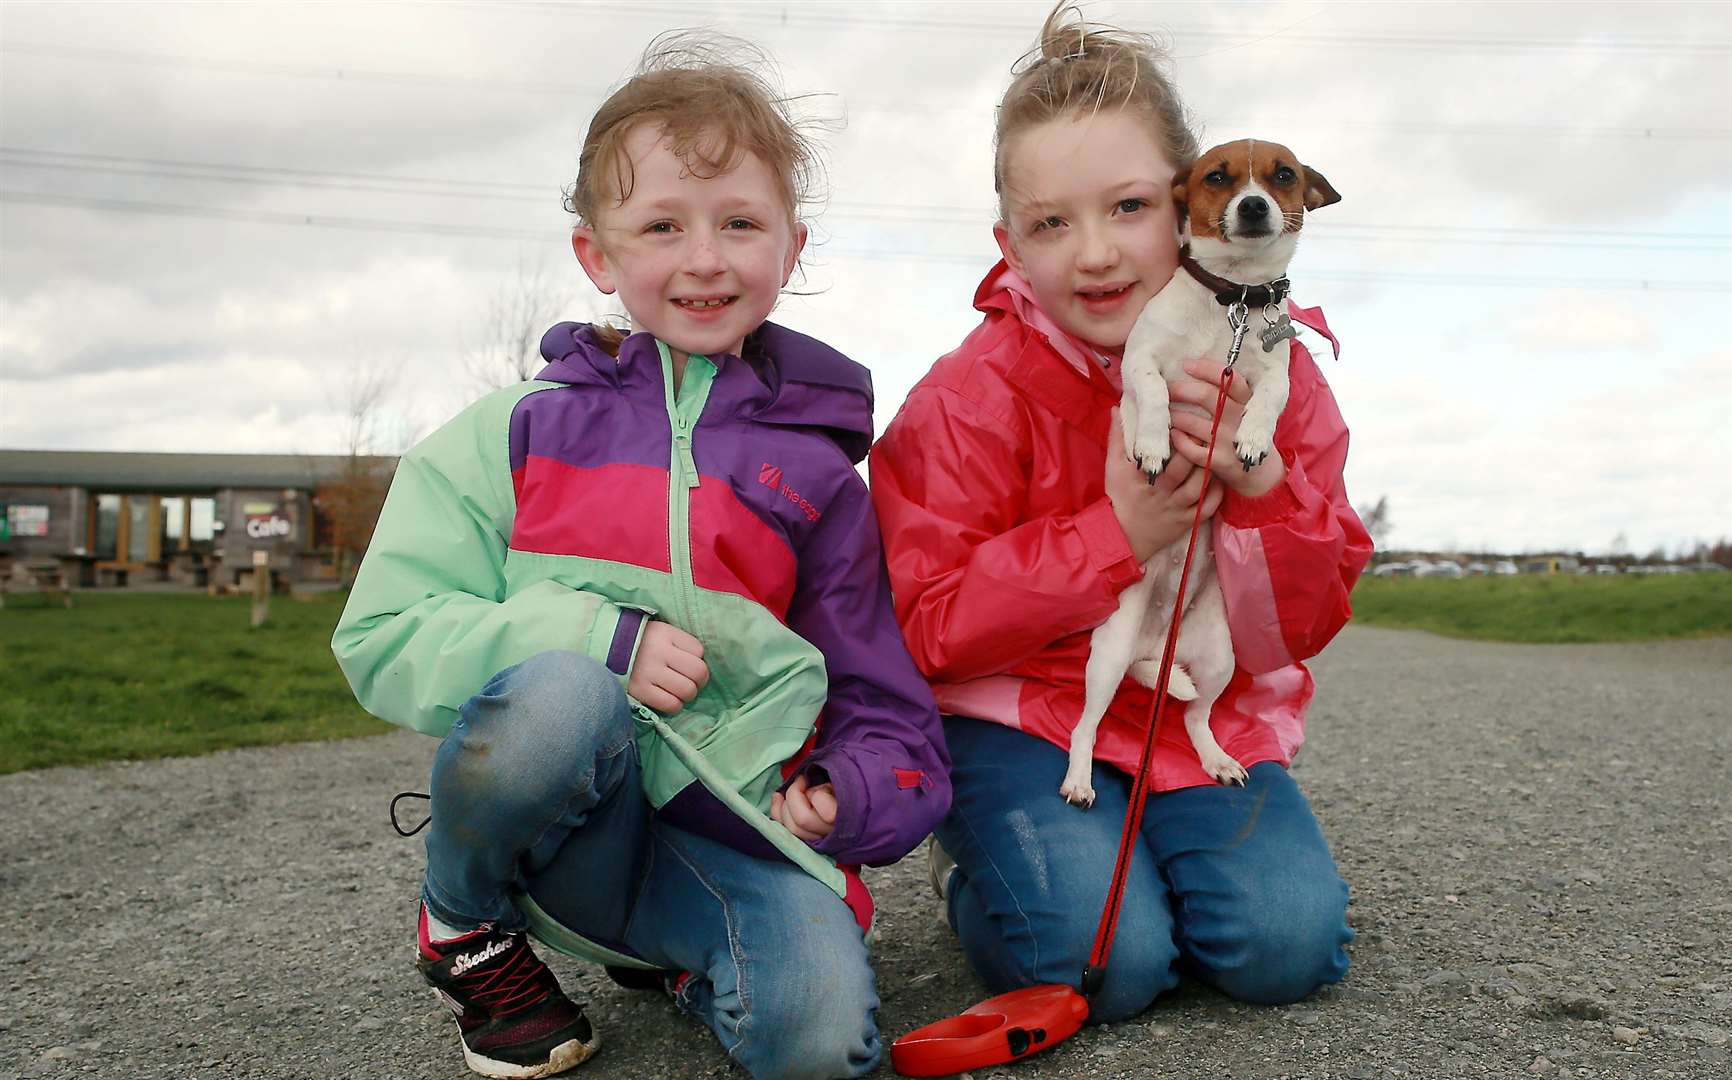 Grace Lawson (left) and Alice Taylor (right) with Dottie the Jack Russell/Chihuahua cross